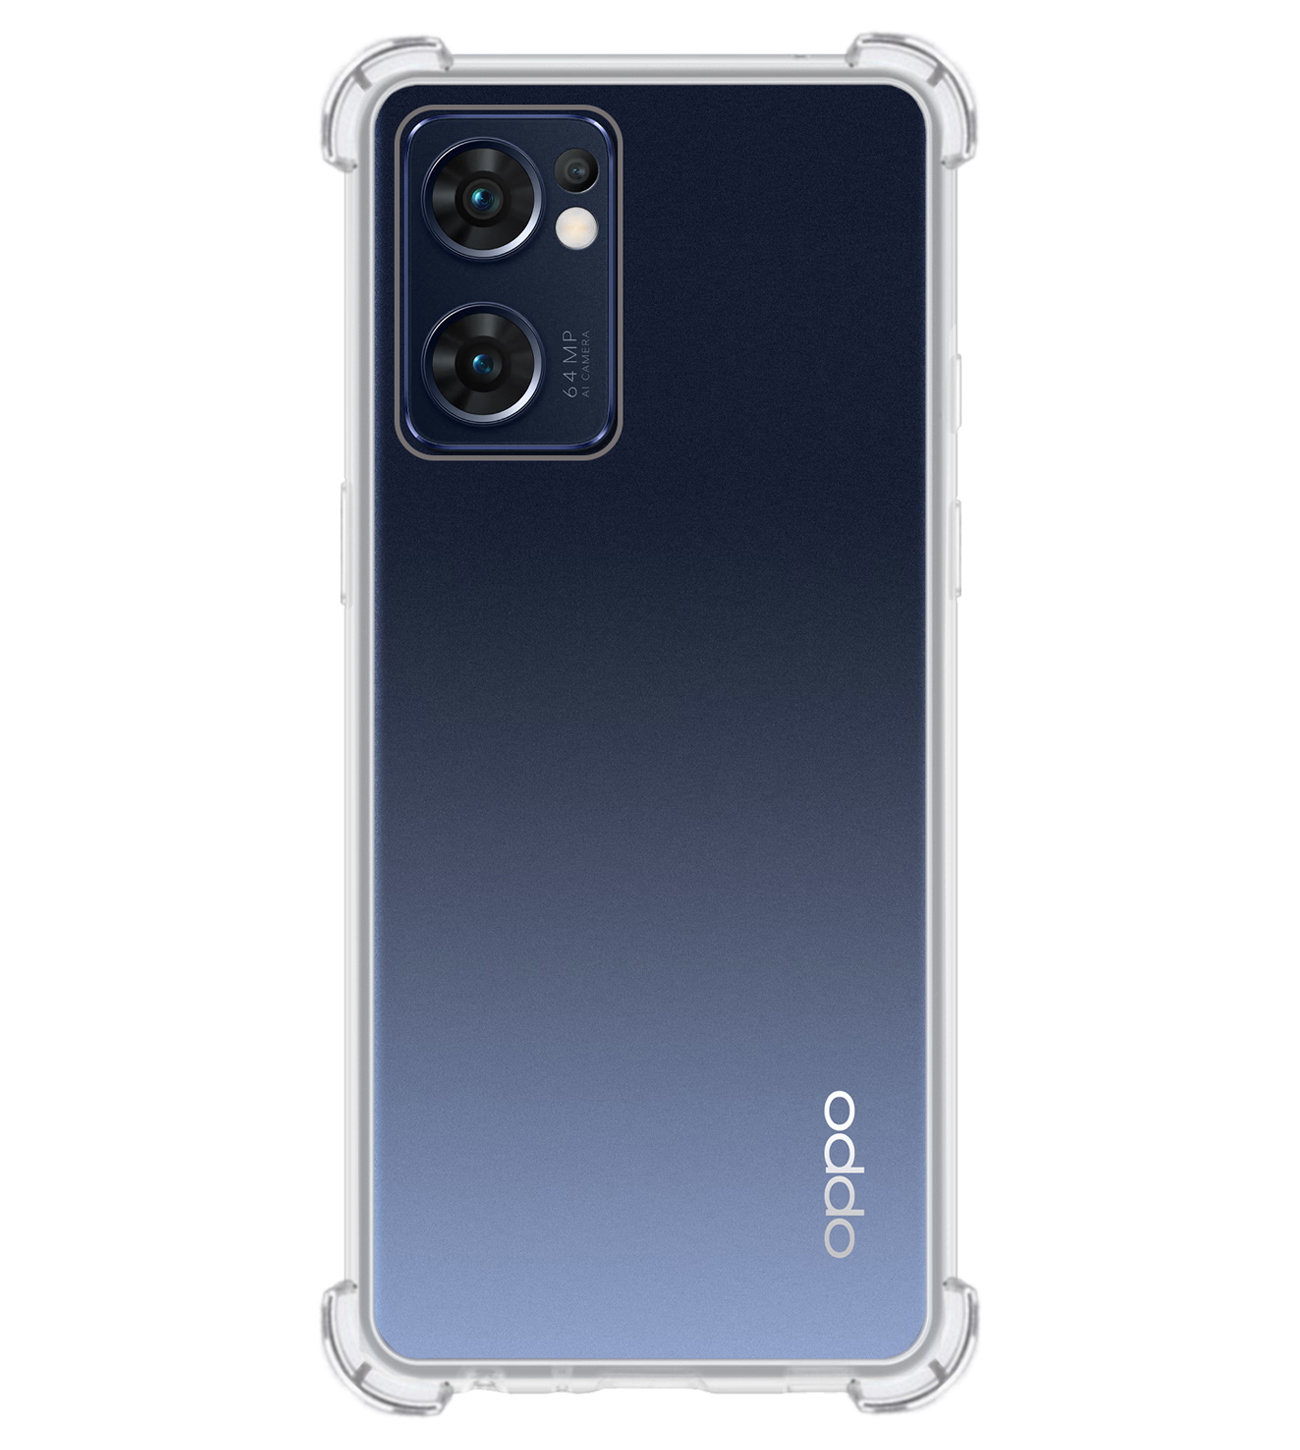 OPPO Find X5 Lite Hoesje Shock Proof Met 2x Screenprotector Tempered Glass - OPPO Find X5 Lite Screen Protector Beschermglas Hoes Shockproof - Transparant